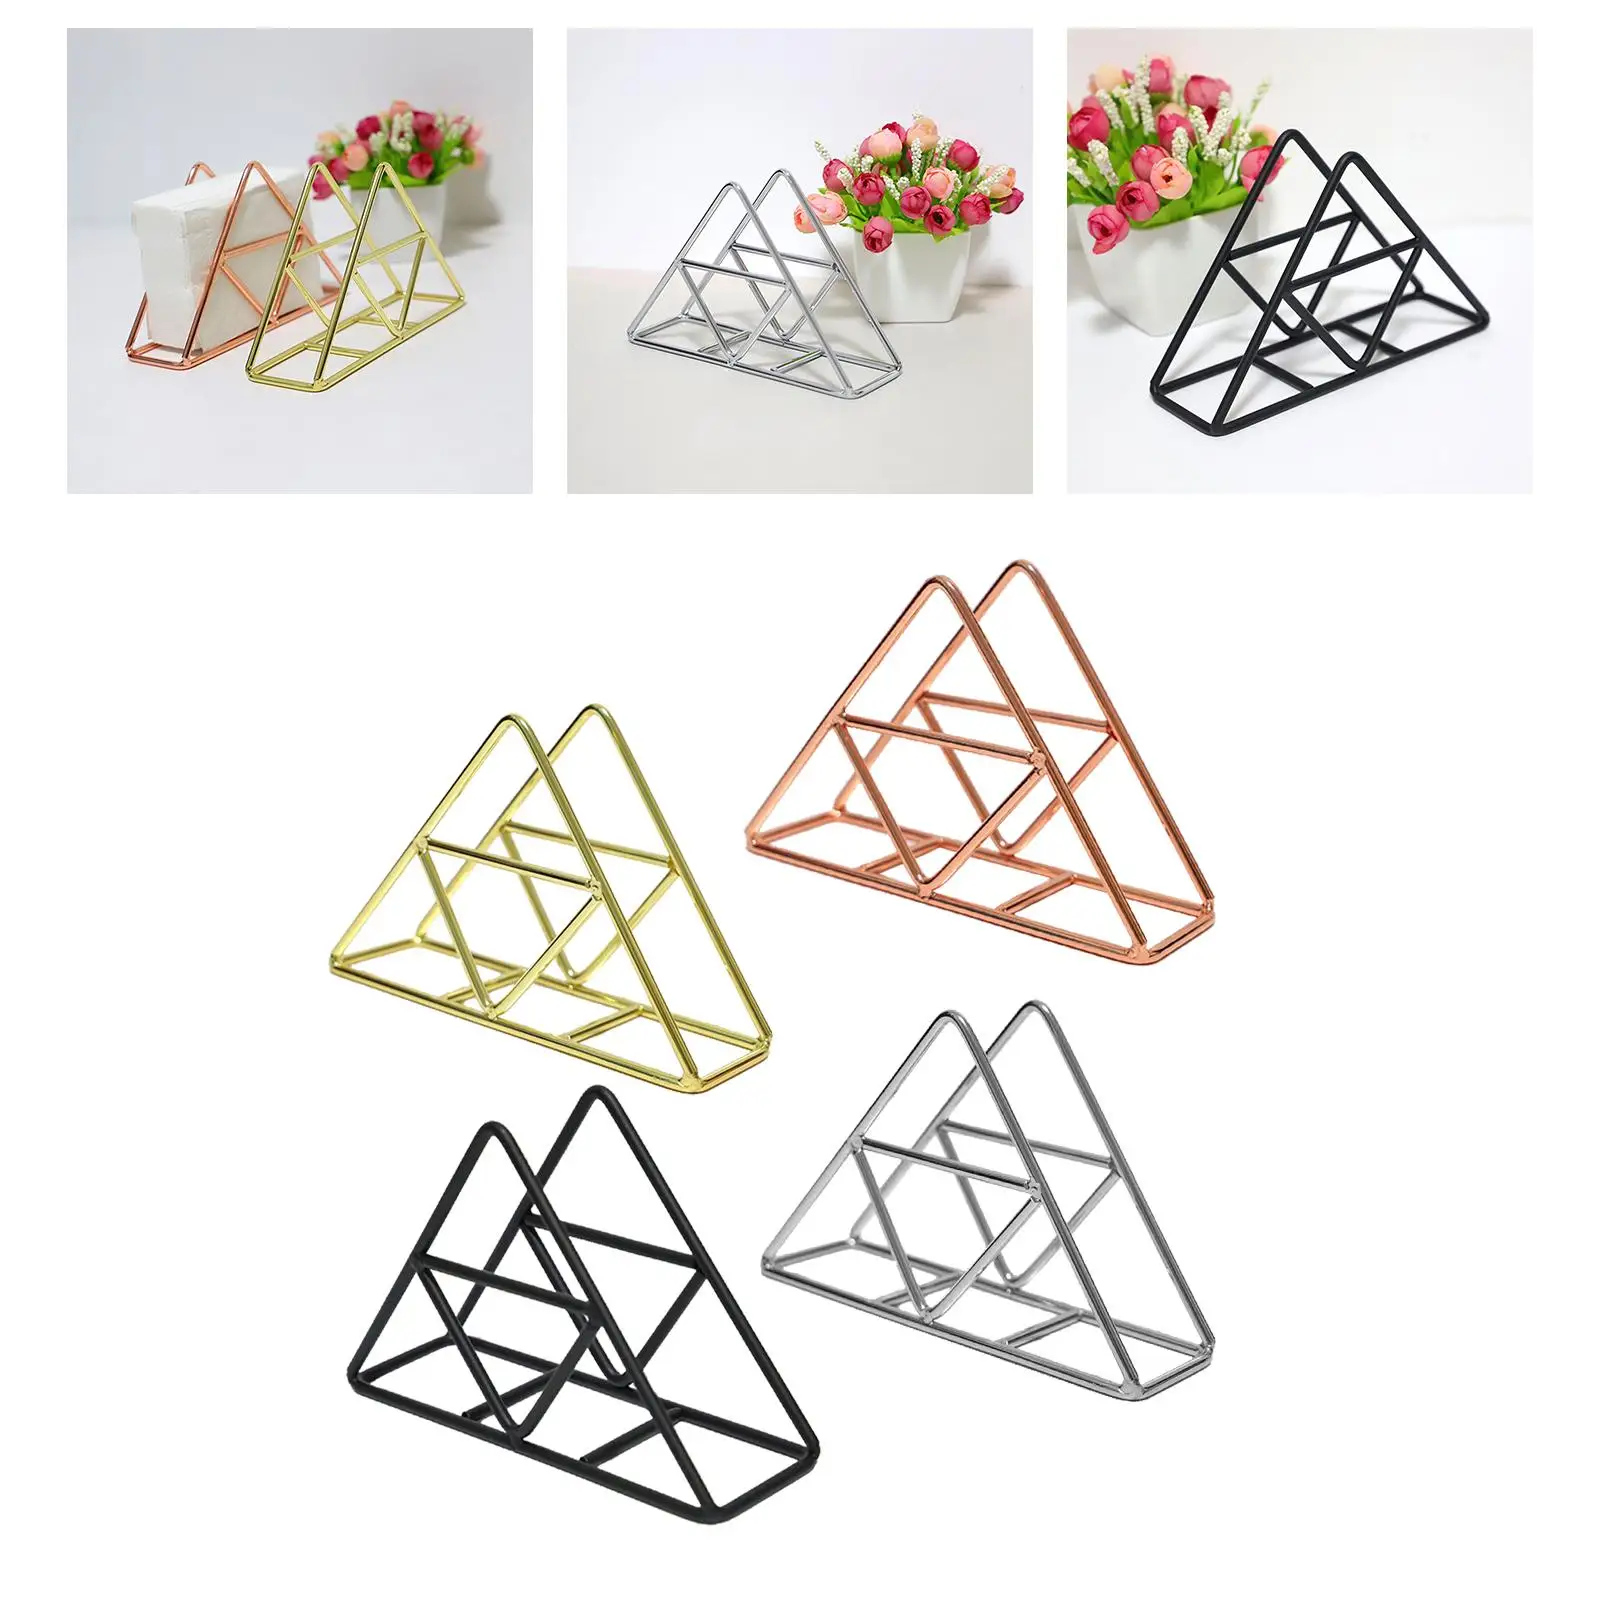 Iron Tabletop Paper Napkin Holder Stand Organization Paper Napkin Holder for Indoor Outdoor Use Party Picnic Table Restaurant